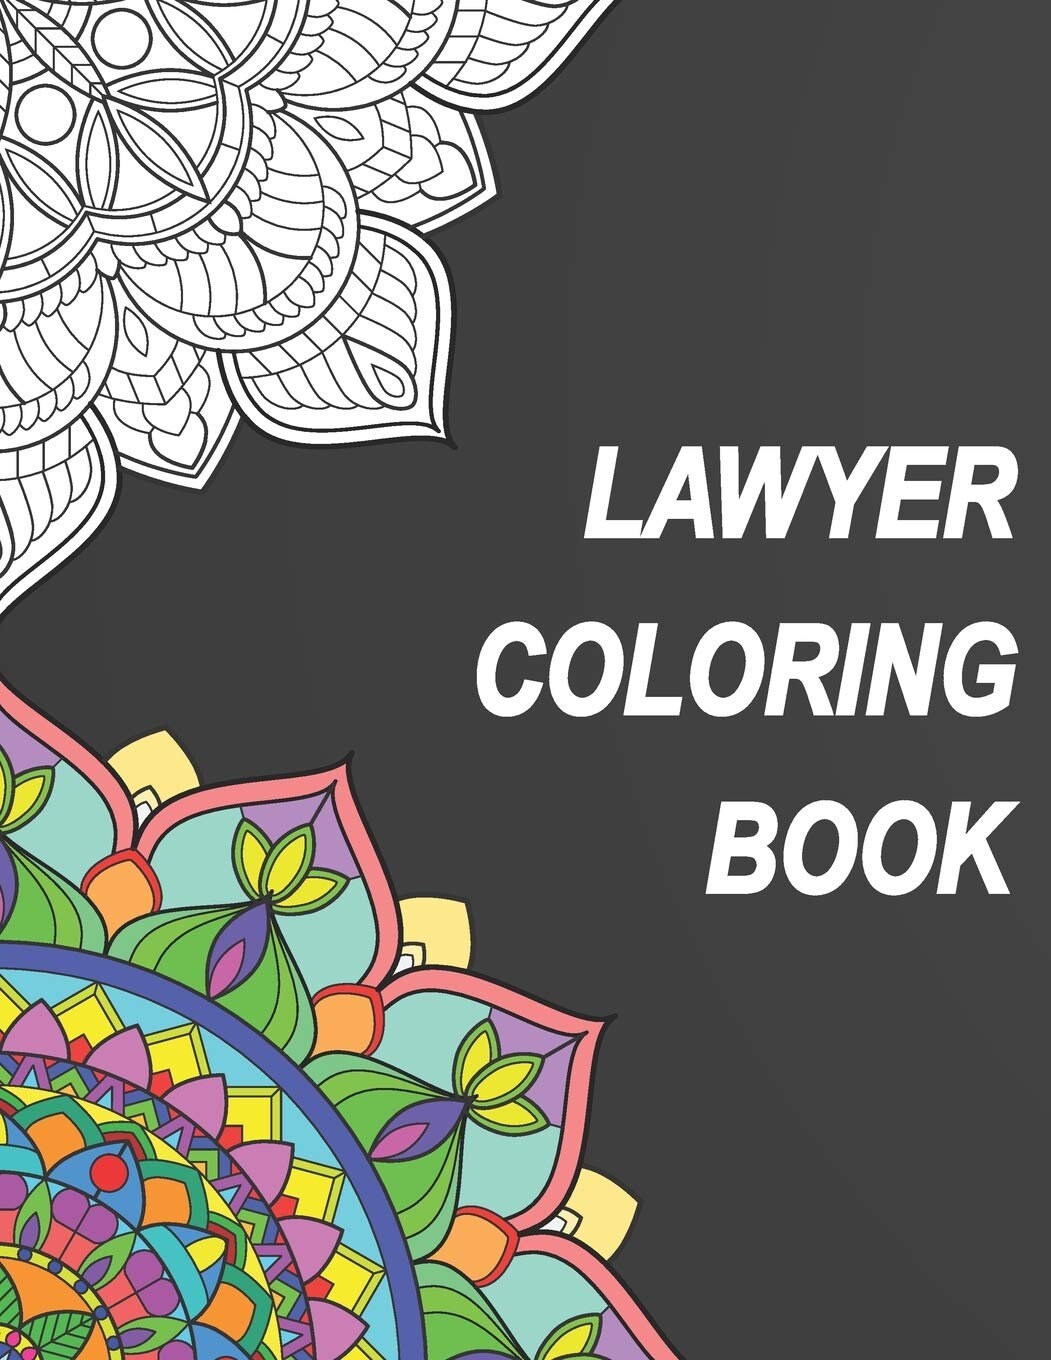 Download Lawyer Coloring Book Relatable Humorous Adult Coloring Book | Etsy